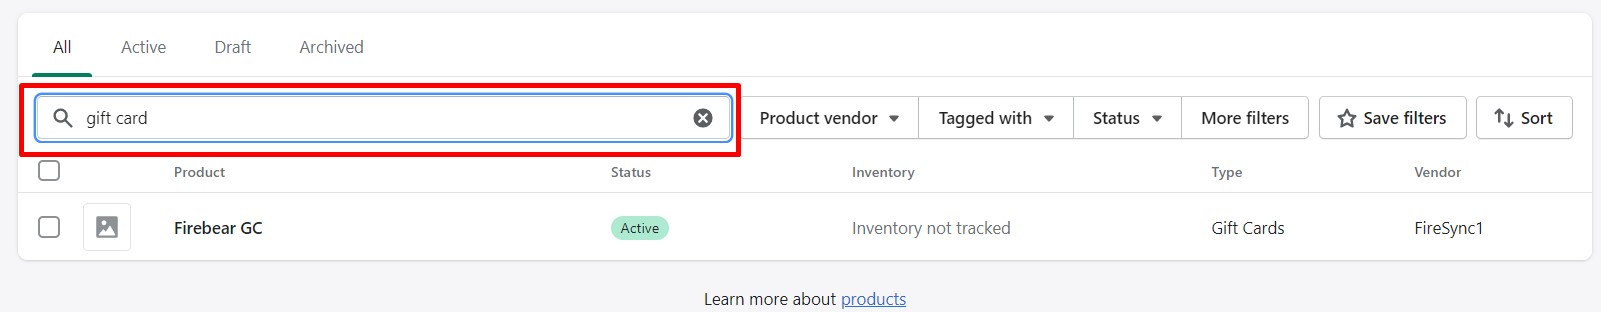 gift card product search field on products page